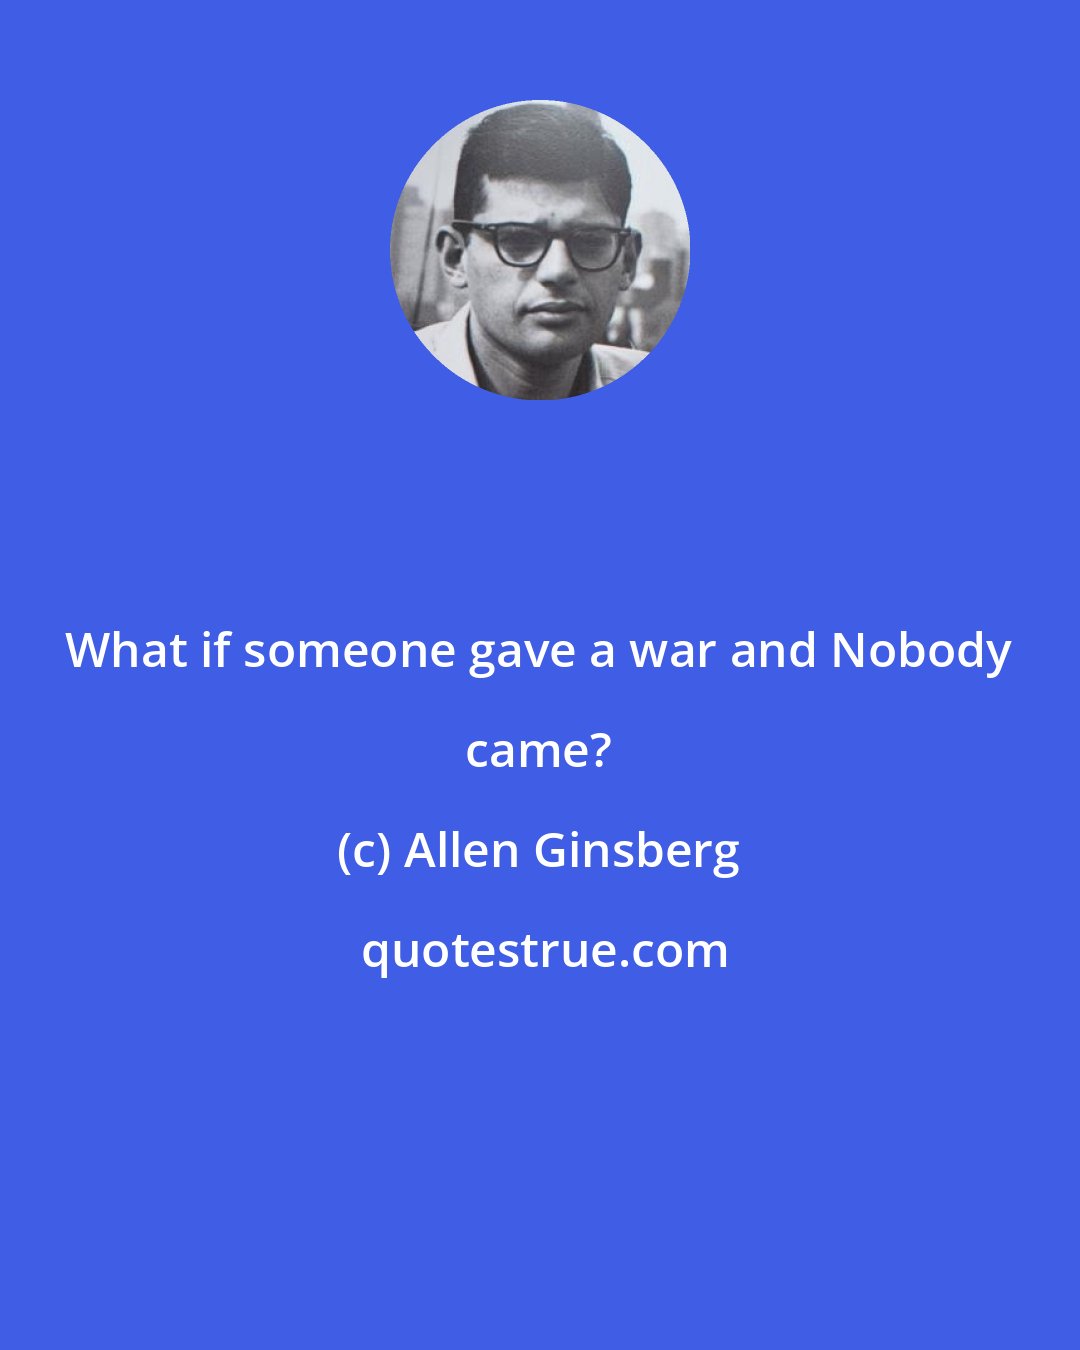 Allen Ginsberg: What if someone gave a war and Nobody came?